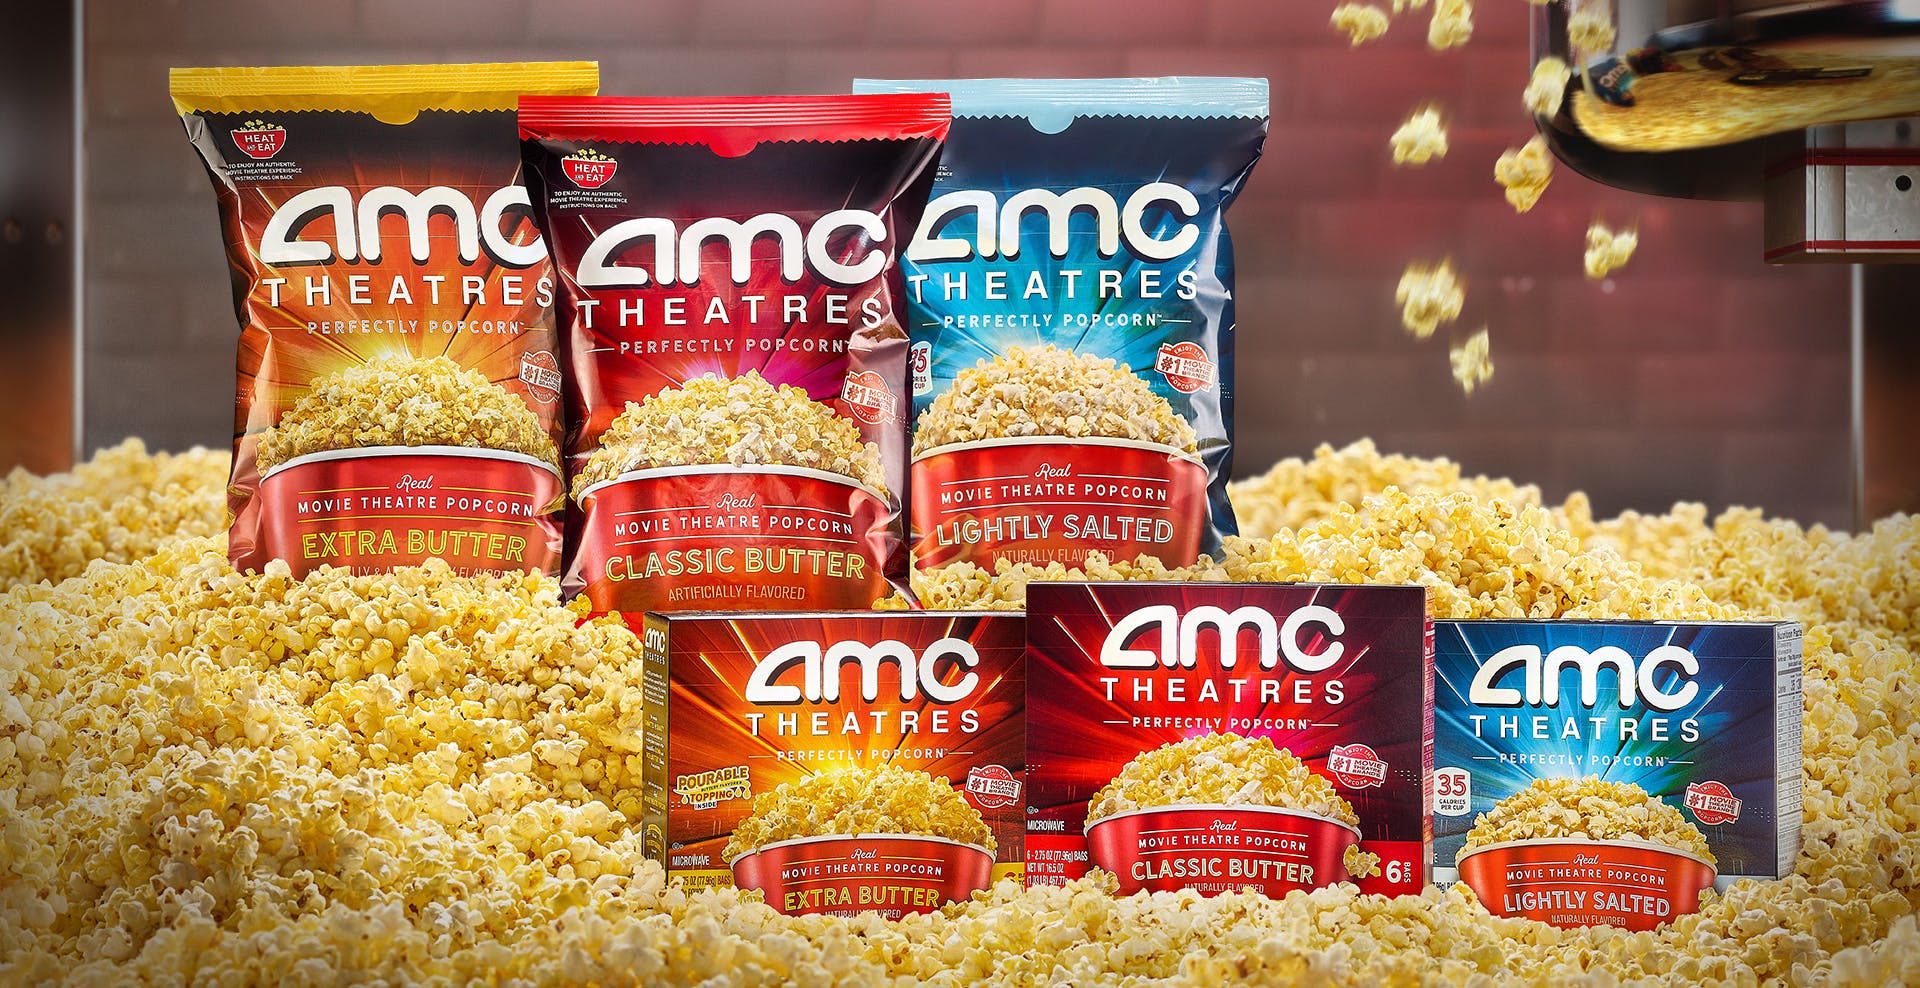 Movie Buffs: You Can Buy AMC Popcorn at Walmart Starting March 11